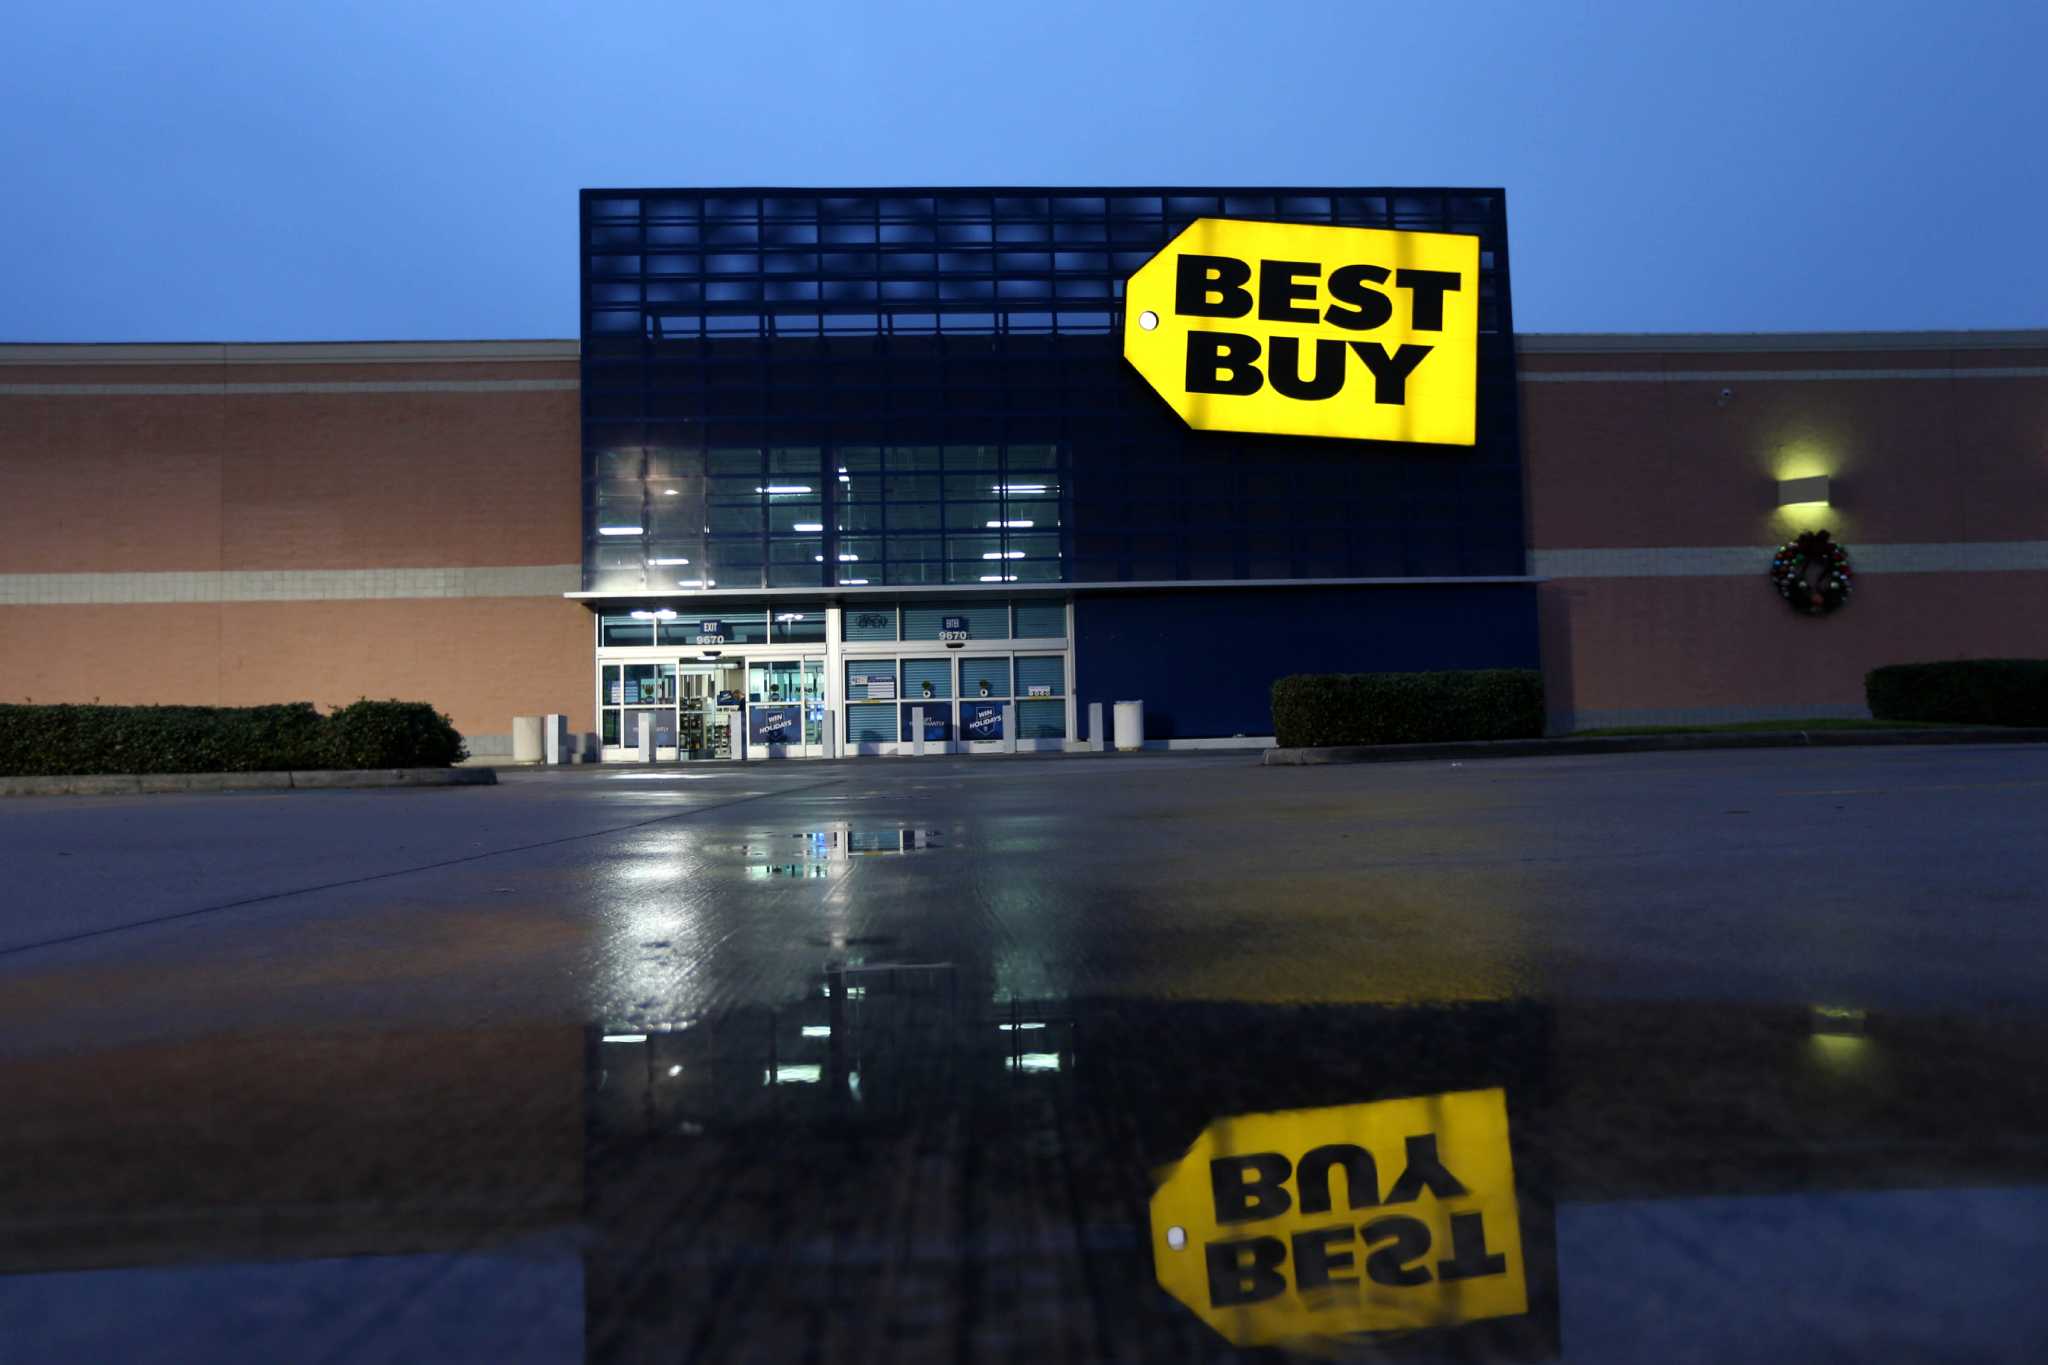 Get Your Best Buy Order with Same-Day Delivery from Getcho